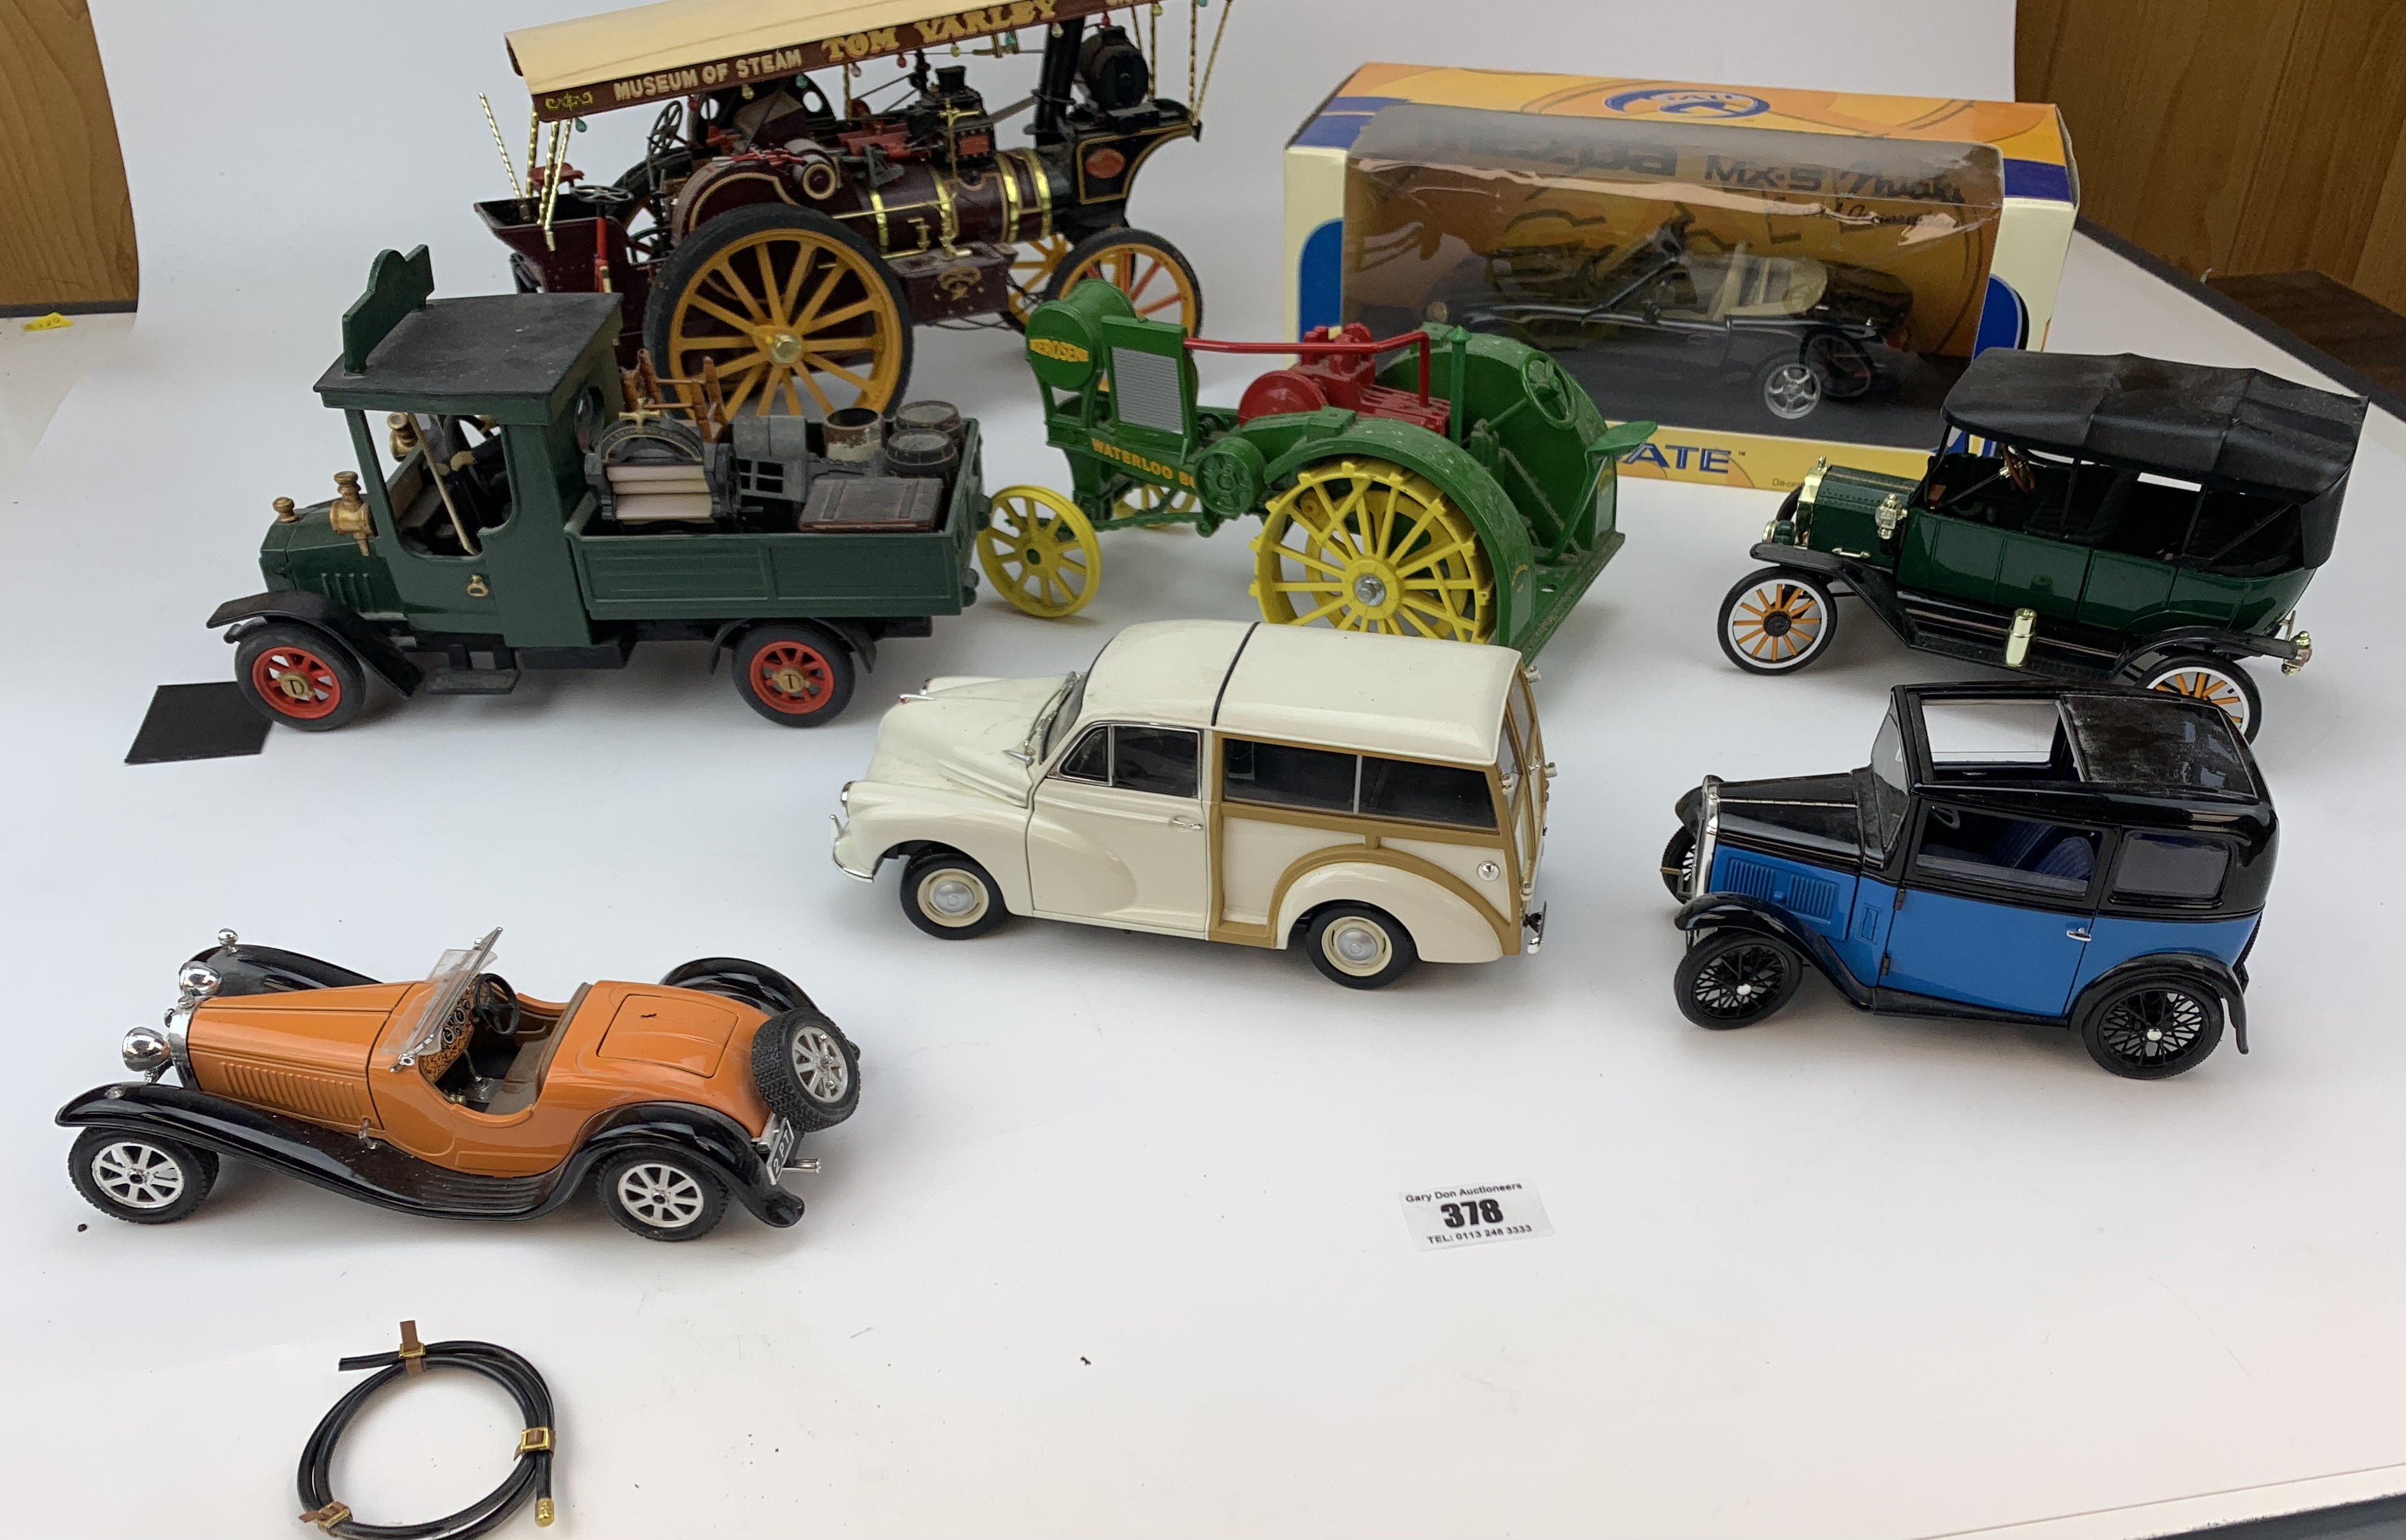 5 loose model cars, boxed Gate Mazda NX5, model Museum of Steam Tom Varley and Waterloo Boy tractor - Image 10 of 17